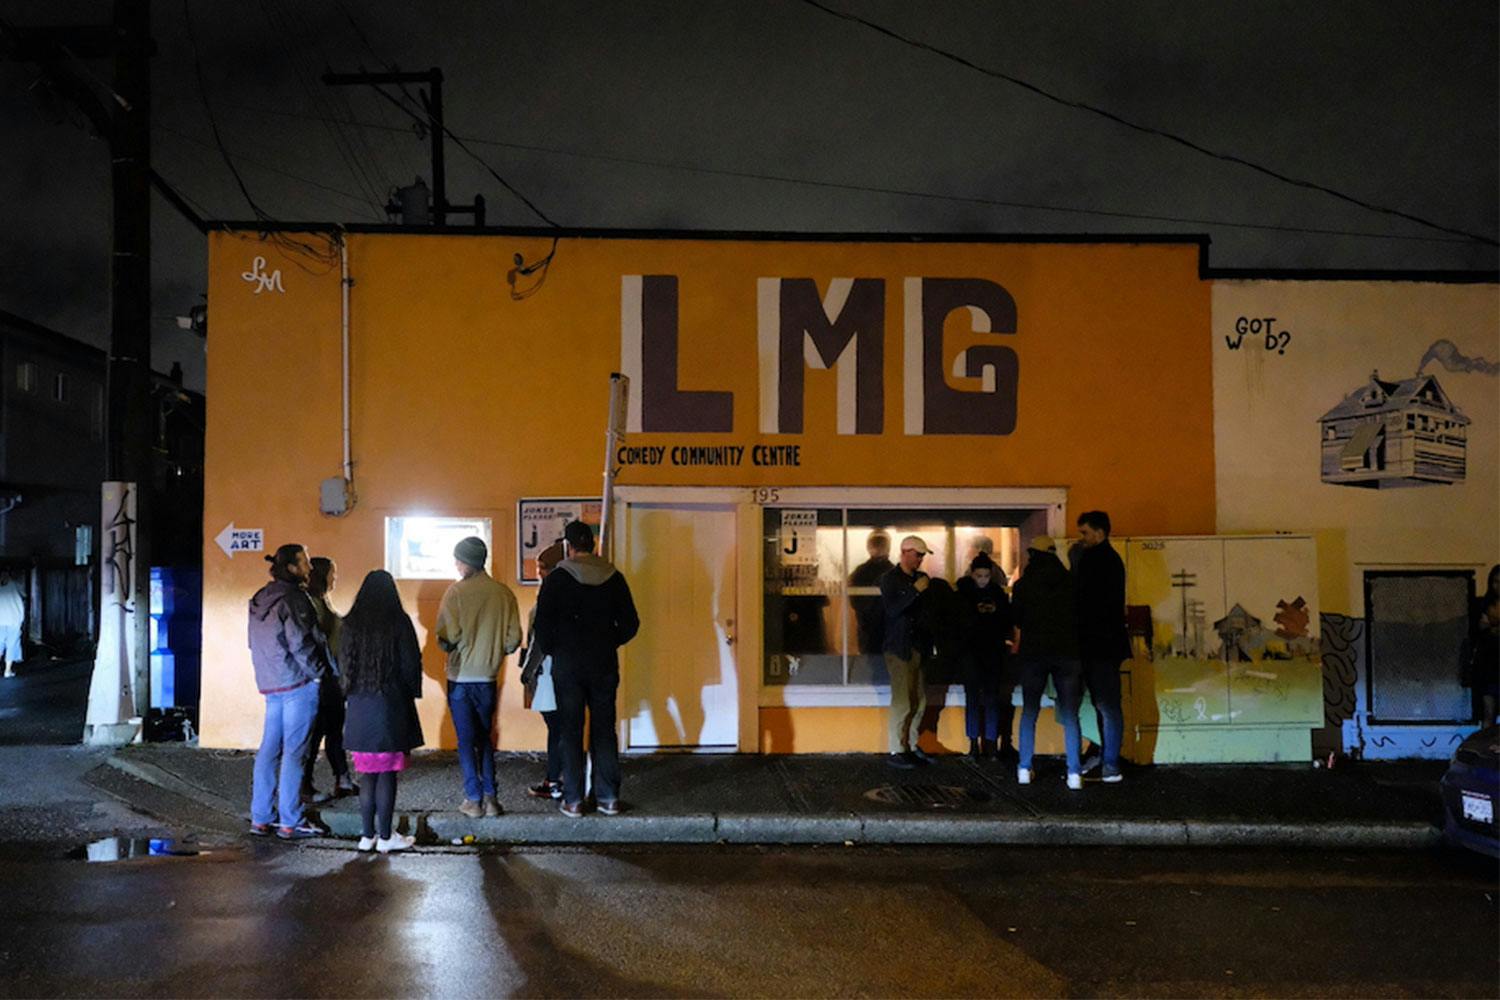 Groups of 4-5 people stand outside an orange building with the letters "LMG" painted in purple above the front door.